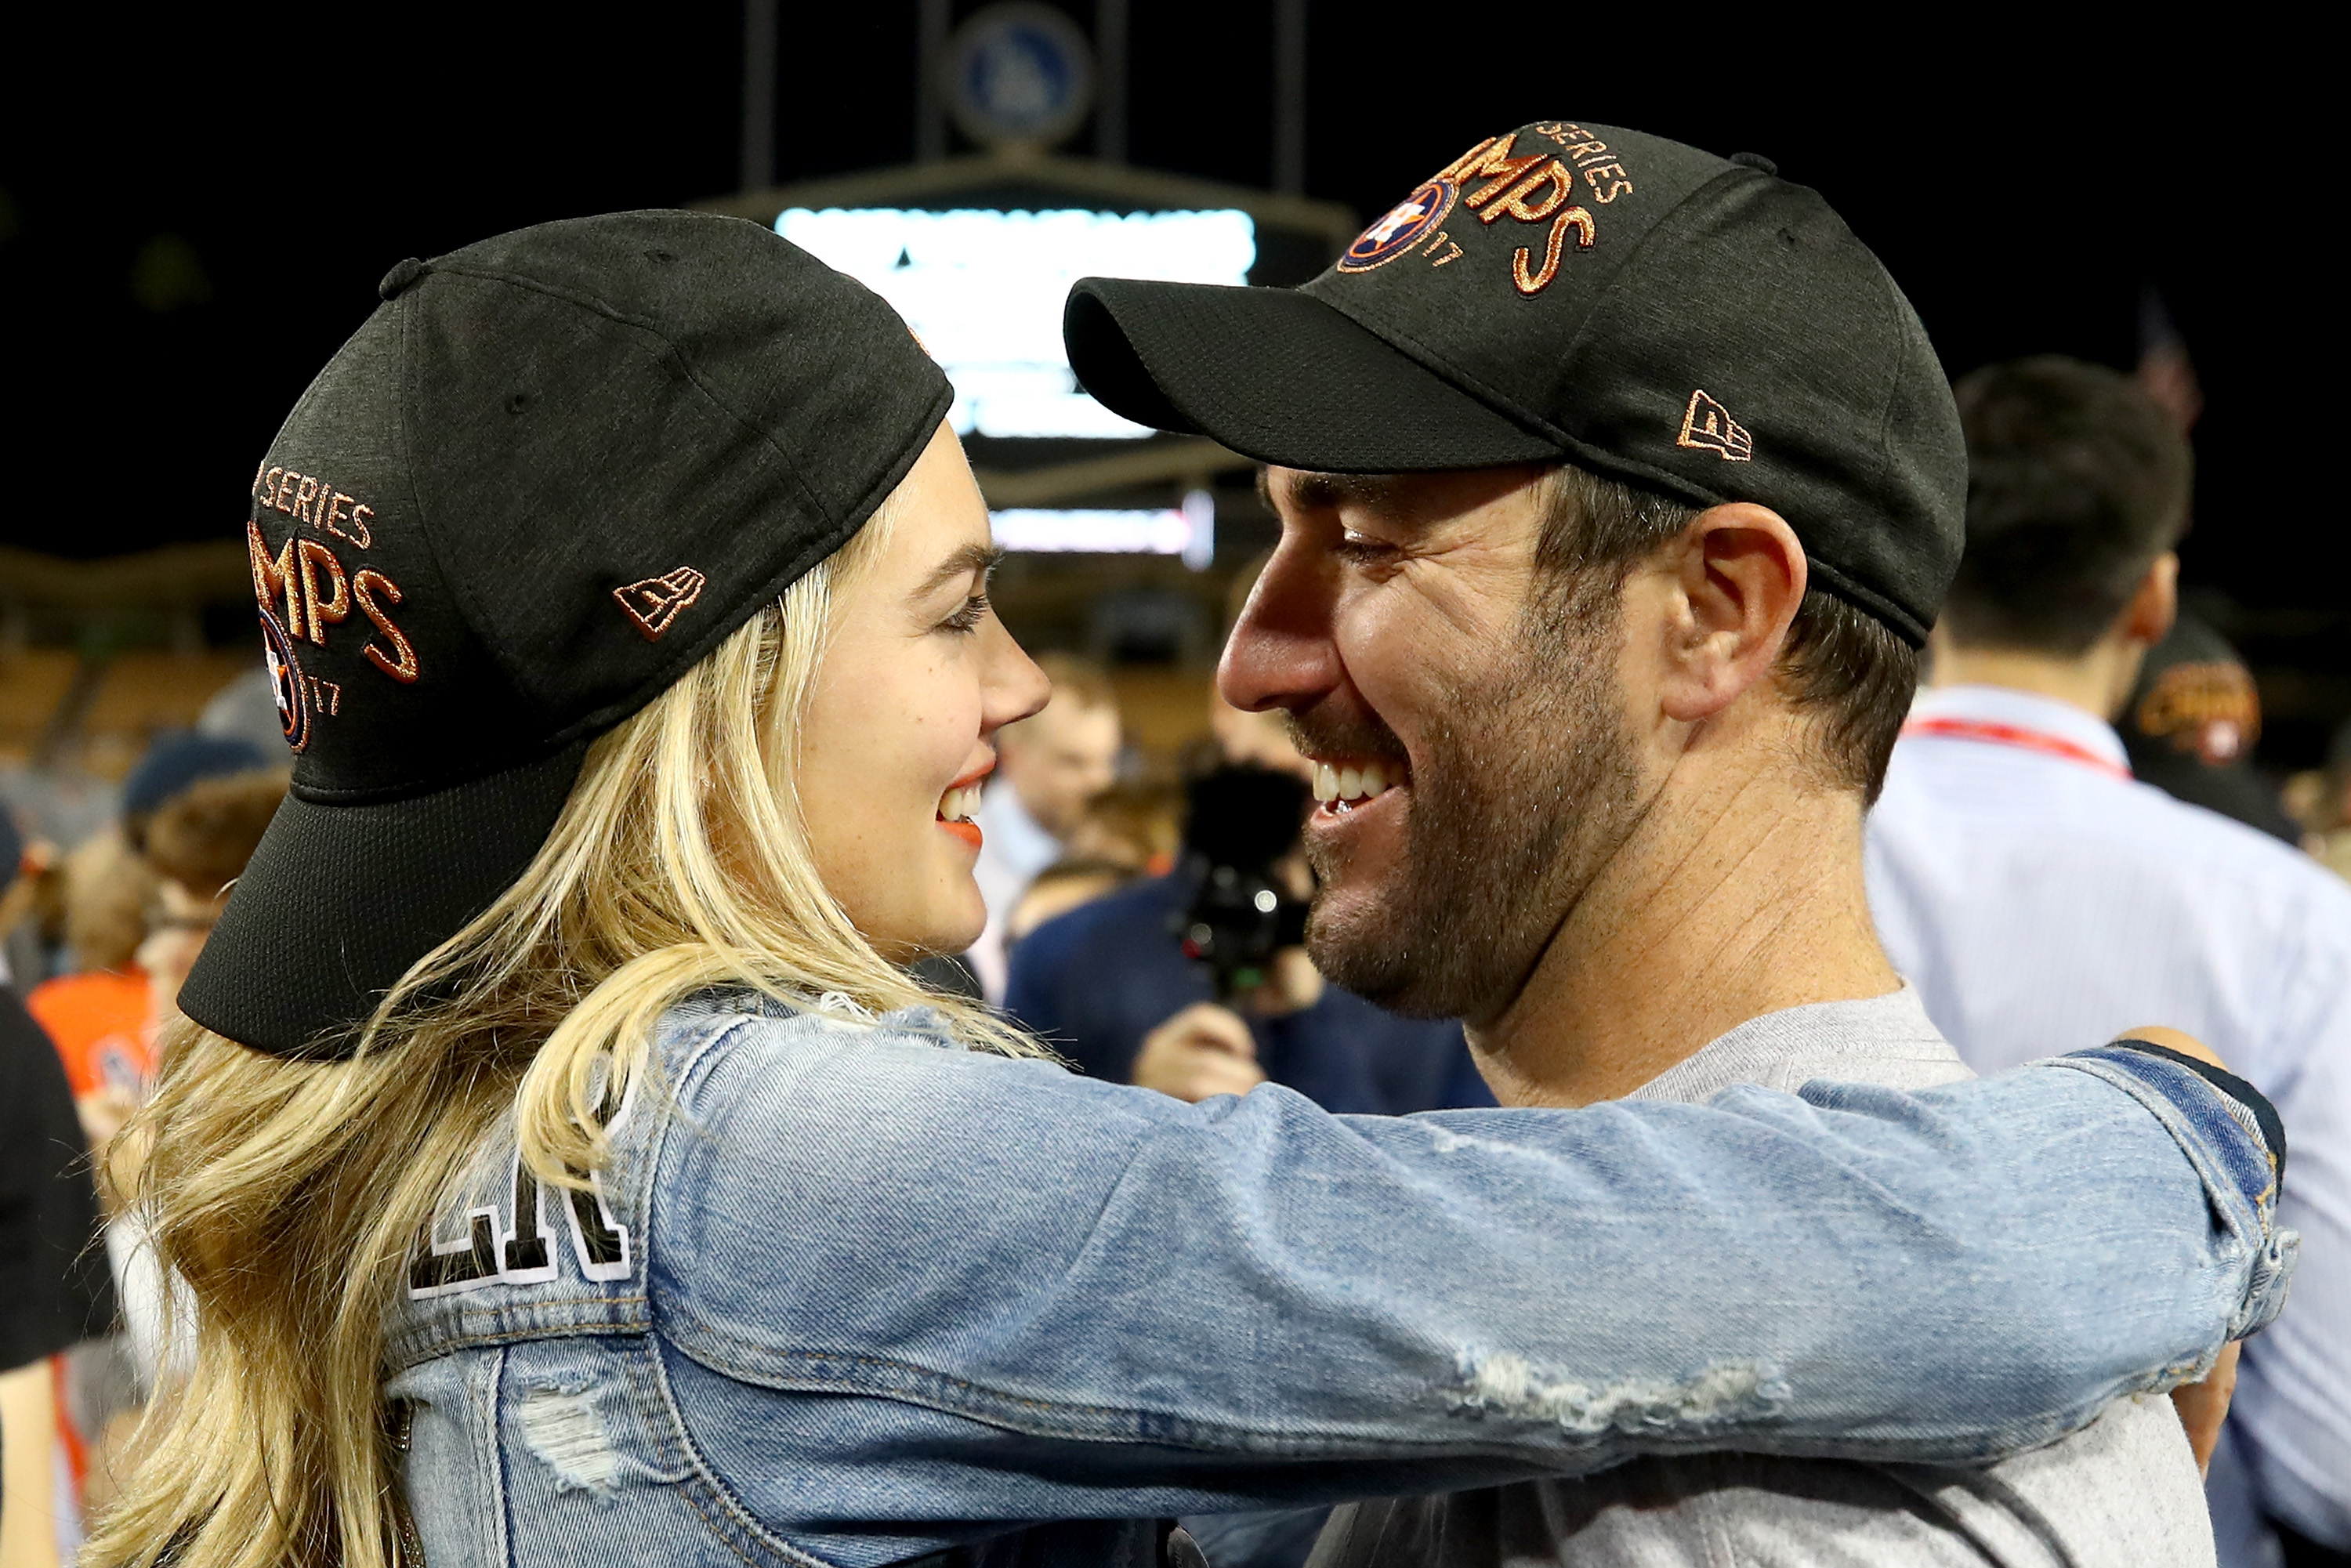 Justin Verlander #35 of the Houston Astros celebrates with fiancee Kate Upton after the Astros defeated the Los Angeles Dodgers 5-1 in game seven to win the 2017 World Series at Dodger Stadium on November 1, 2017 in Los Angeles, California.  (Photo by Ezra Shaw/Getty Images)